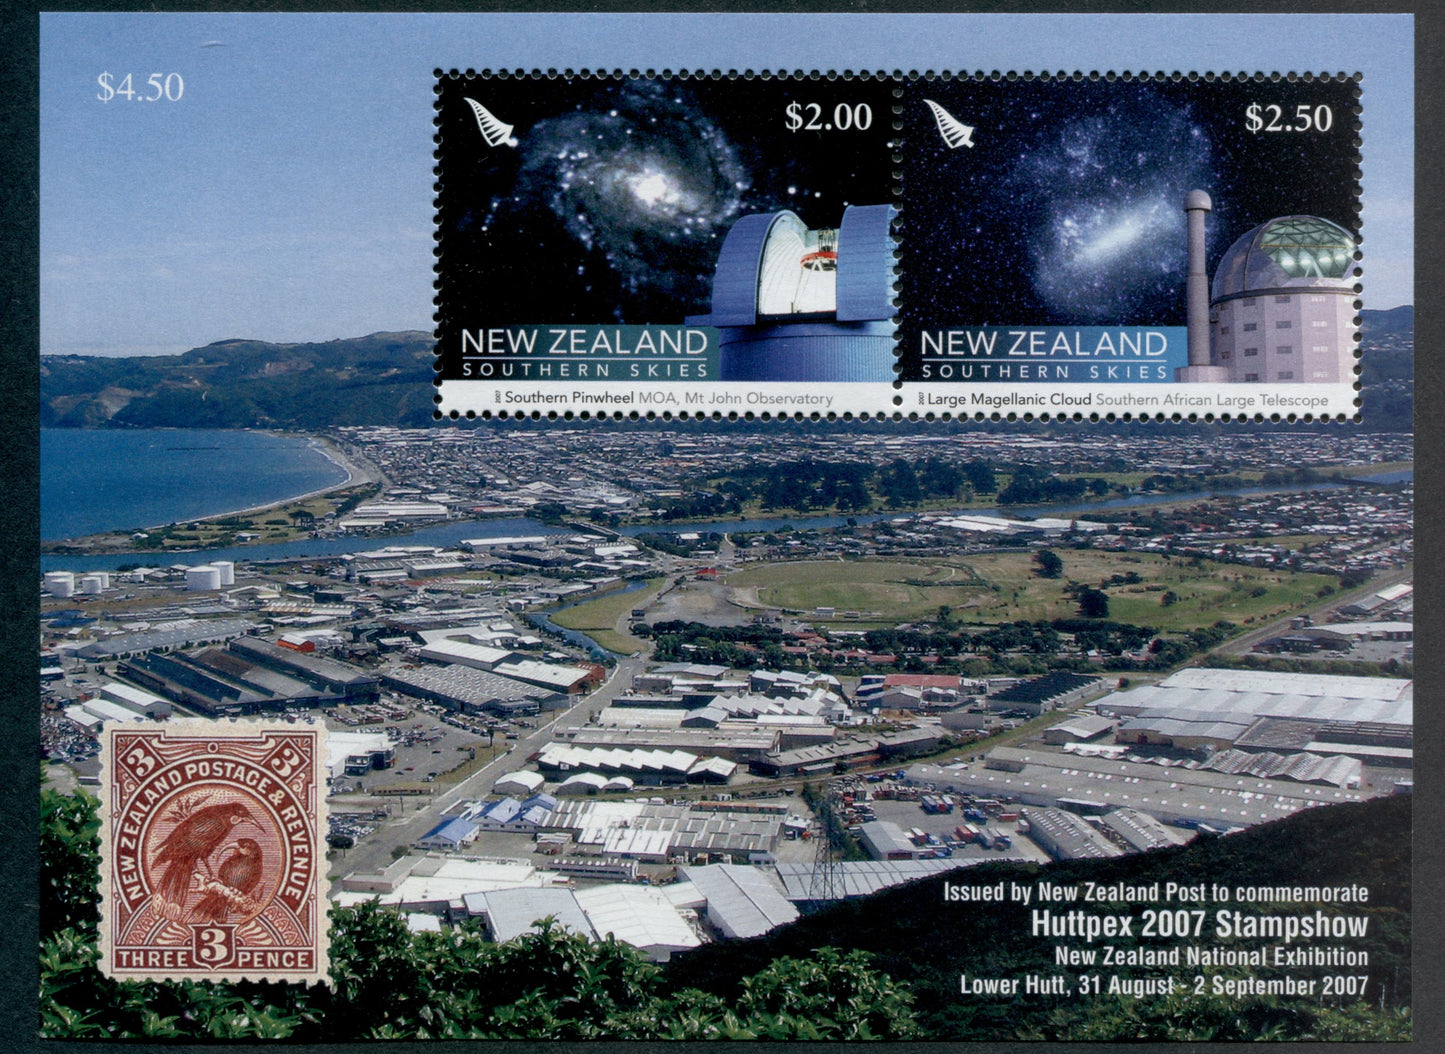 Lot 151 New Zealand SC#1976b/2143d 2007 Commemoratives, A VFNH Range Of Souvenir Sheets, 2017 Scott Cat. $23 USD, Click on Listing to See ALL Pictures